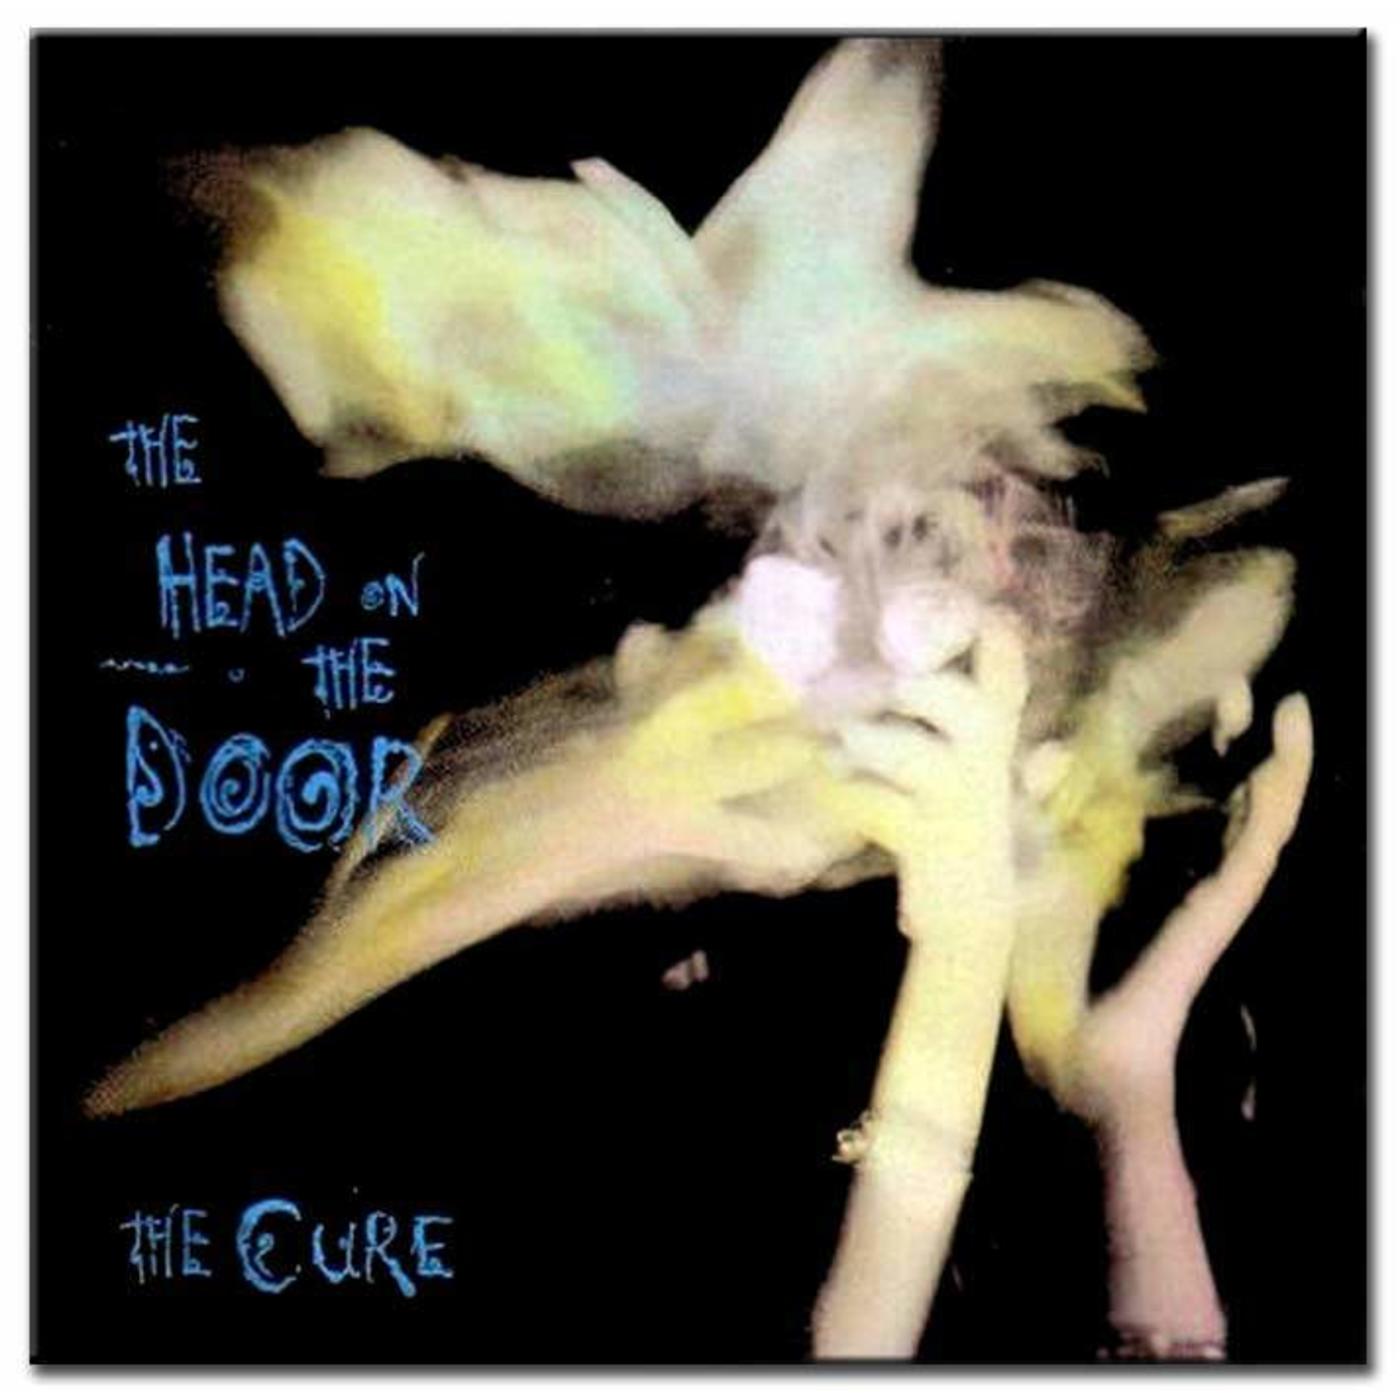 The Cure: Close To Me